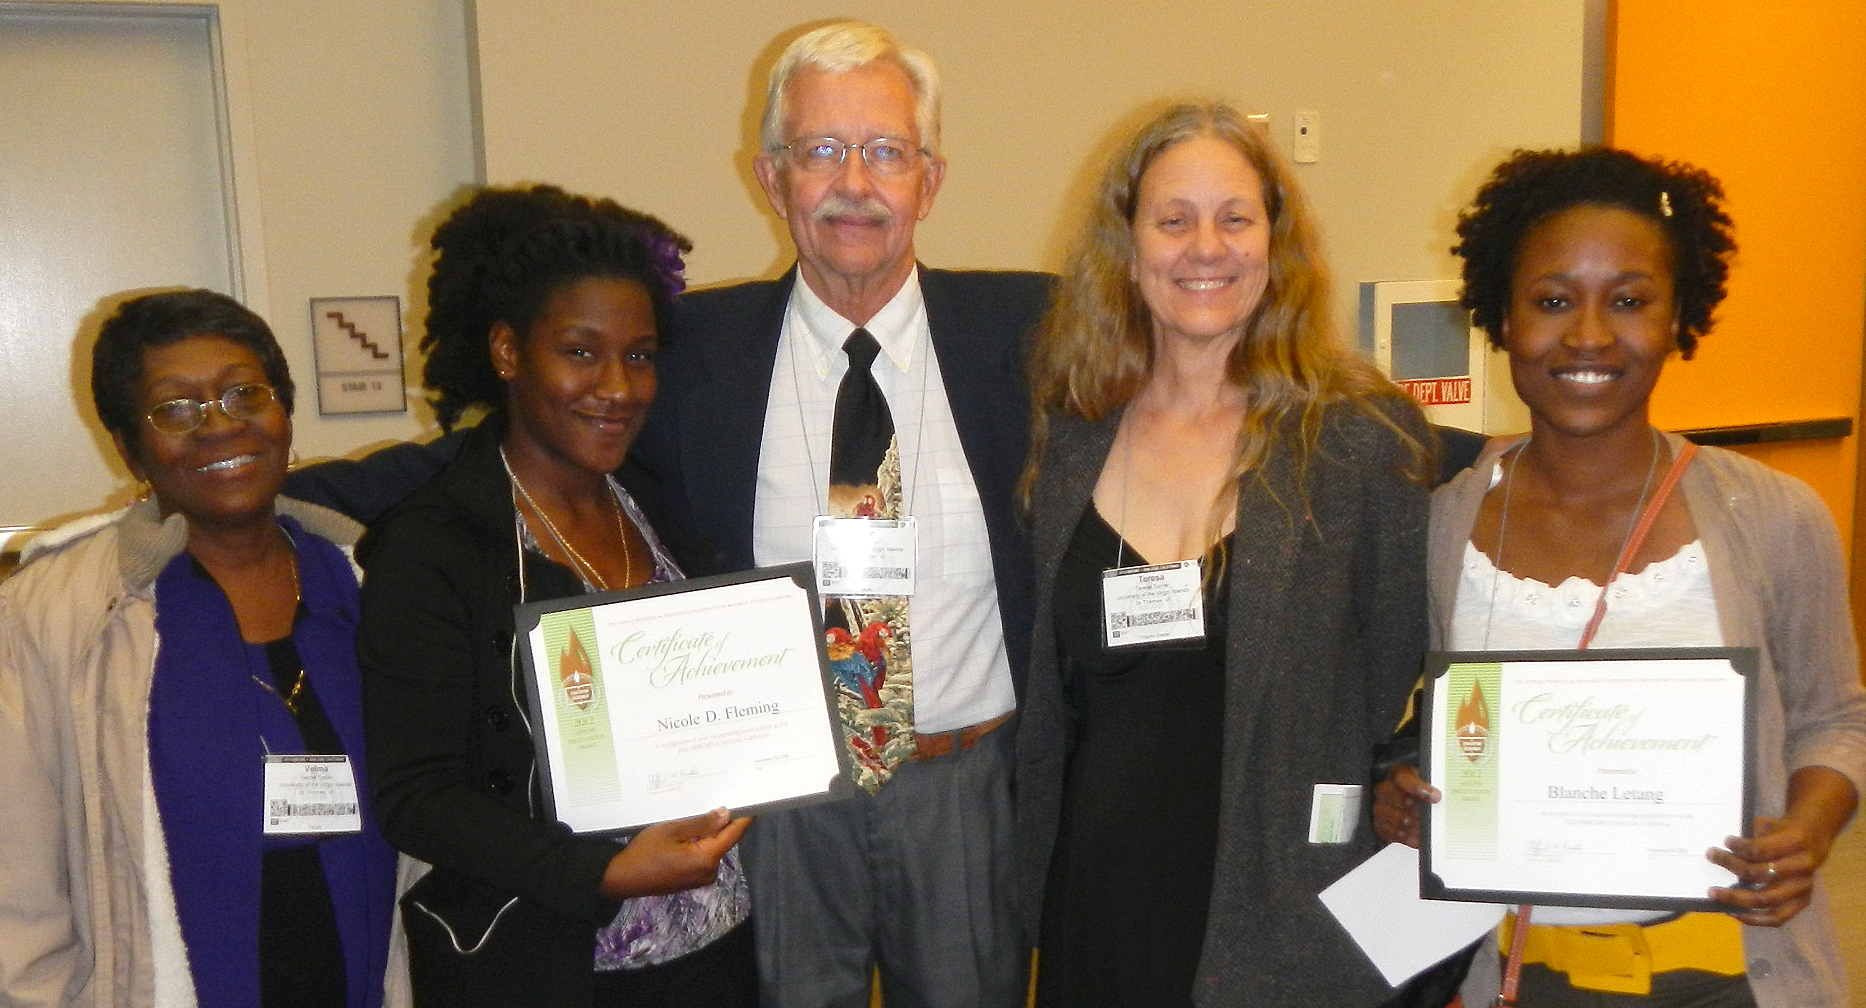 Alumni awardees and faculty: UVI Professor Dr. Velma Tyson, alumna Nicole Fleming (‘12), Professor Dr. Donald Drost, Professor Dr. Teresa Turner and alumna Blanche Letang (‘12) attend the 12th Annual Biomedical Research Conference for Minority Students in San Jose, California. Fleming and Letang won awards at the conference.